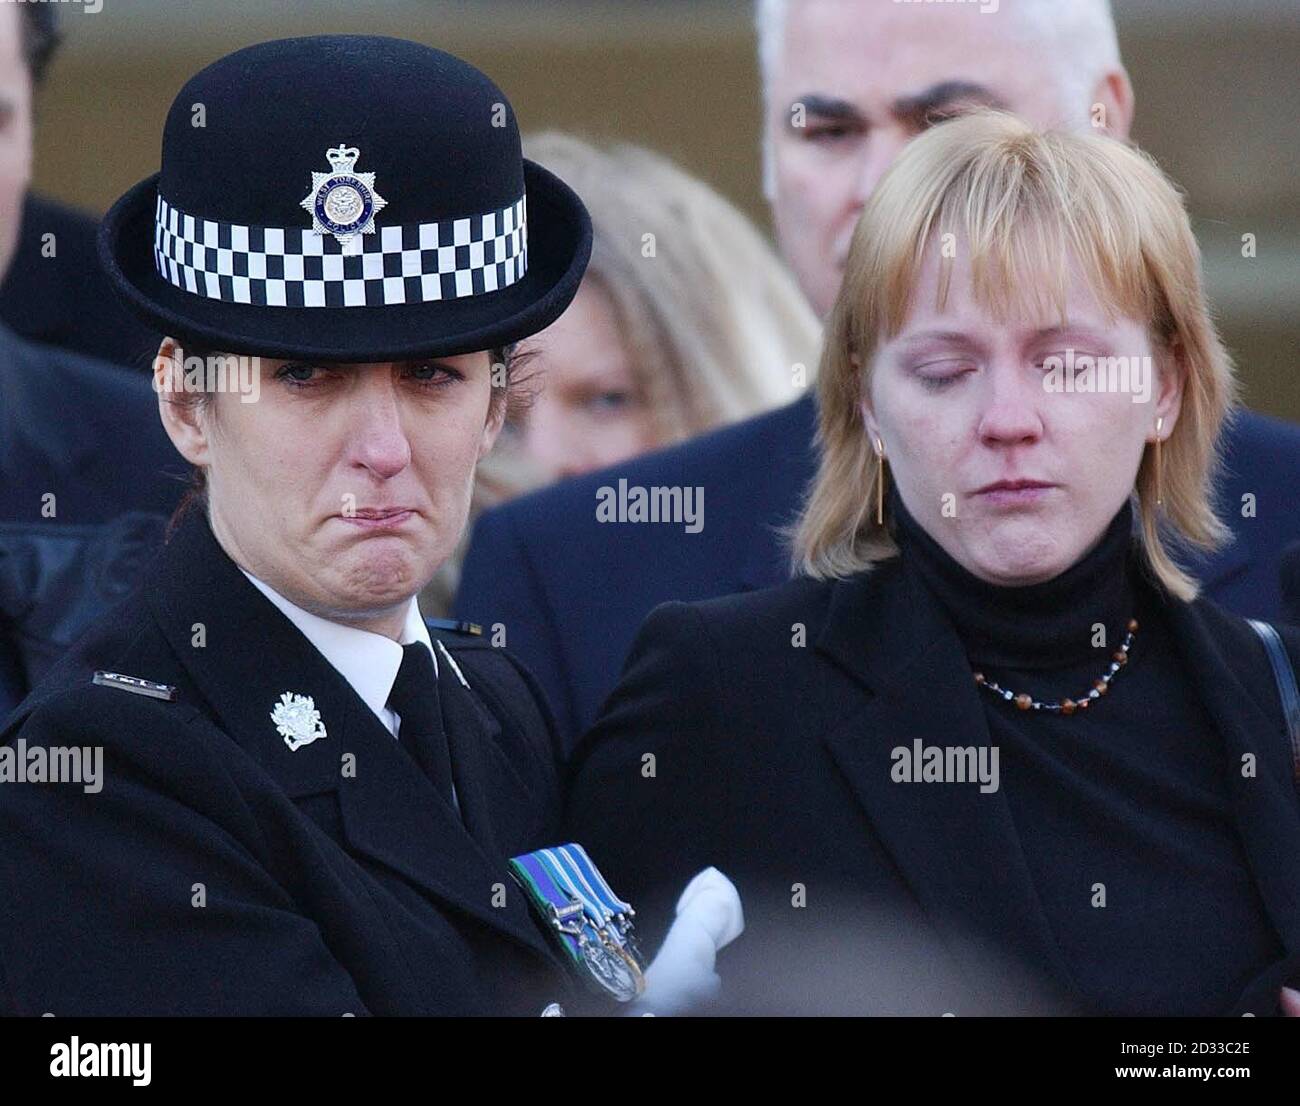 The widow of traffic policeman Ian Broadhurst, Eilisa (right), stands with officers, at Leeds Parish Church, West Yorkshire as  hundreds of mourners joined to bid a final farewell to her husband. Pc Broadhurst, 34, from Birkenshaw, West Yorkshire, was shot twice while helping to arrest American David Bieber in Dib Lane, Leeds on Boxing Day 2003.The funeral began with around 800 people packed into the church and hundreds more outside watching the ceremony on a large video screen. Stock Photo